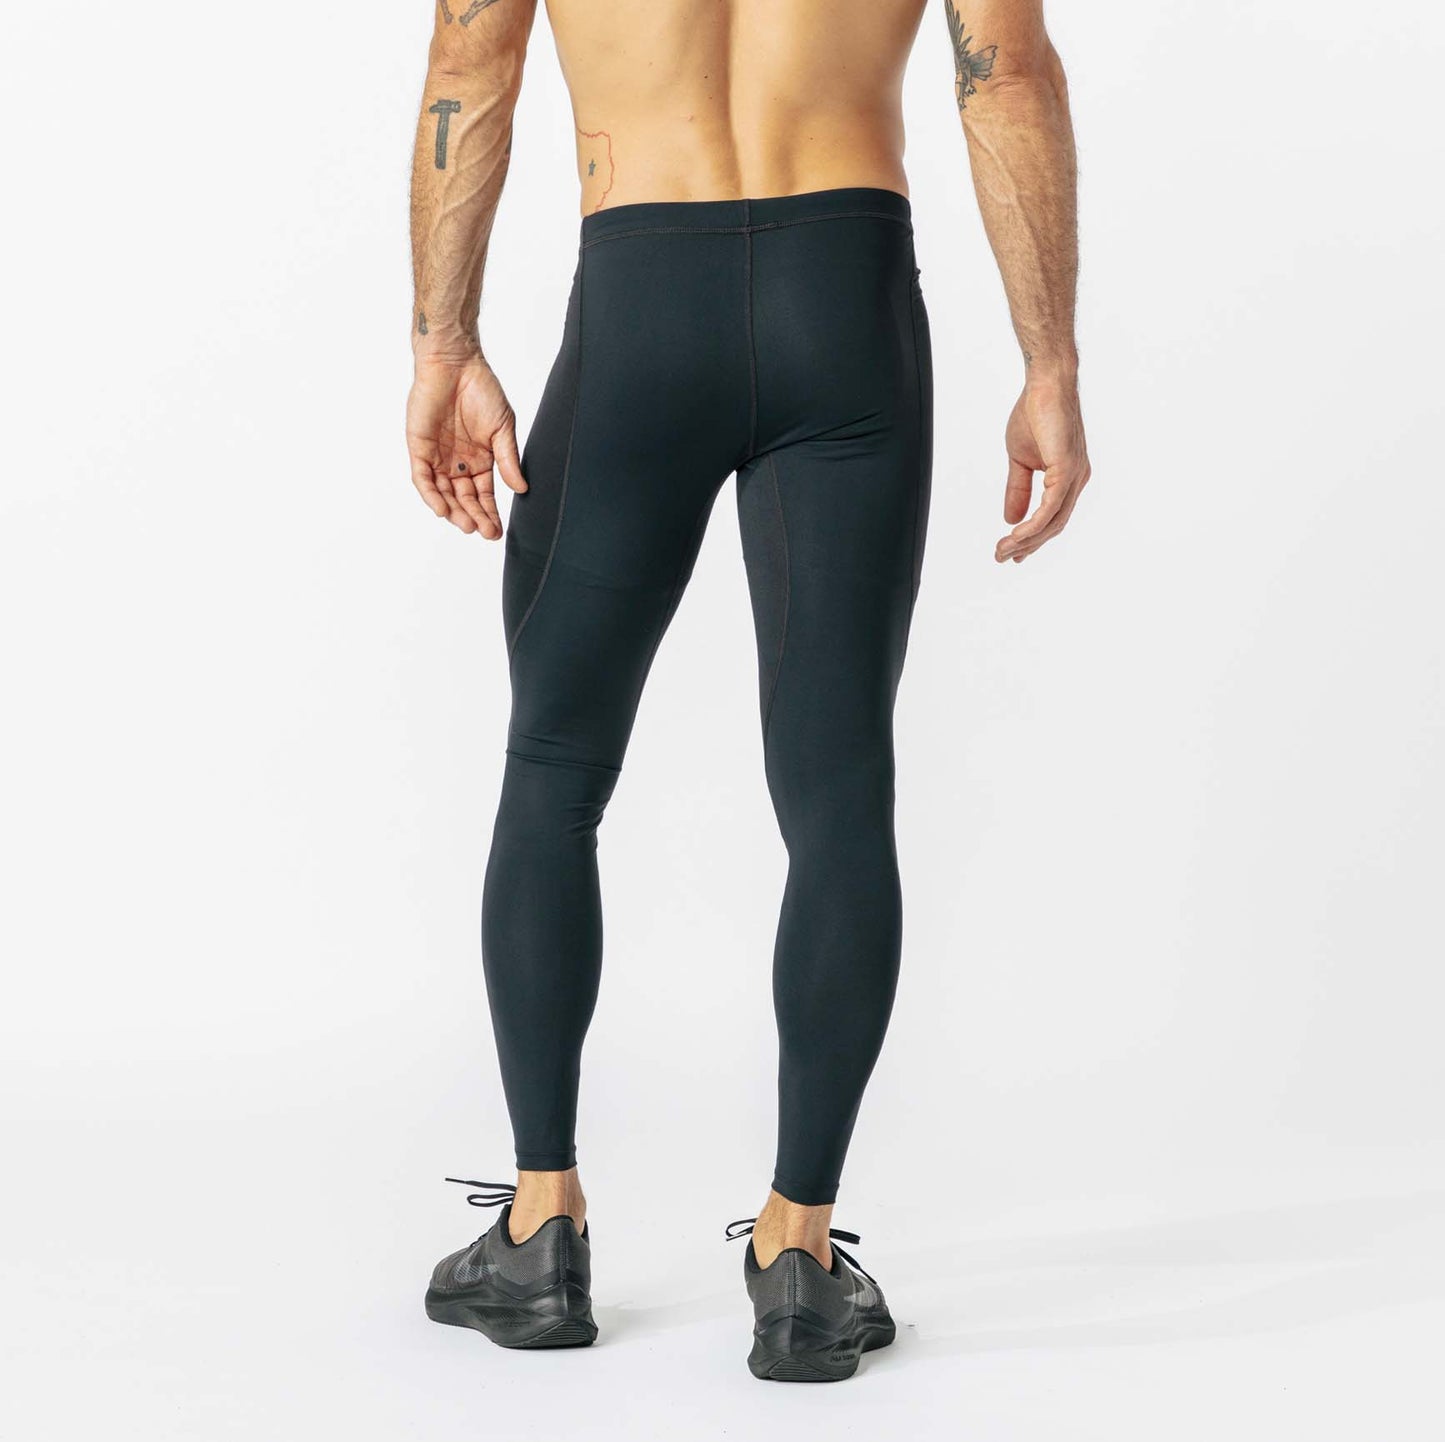  Yuerlian Men's Thermal Compression Pants, Fleece Lined Running  Tights Compression Baselayer Leggings with Pockets for Cold : Clothing,  Shoes & Jewelry